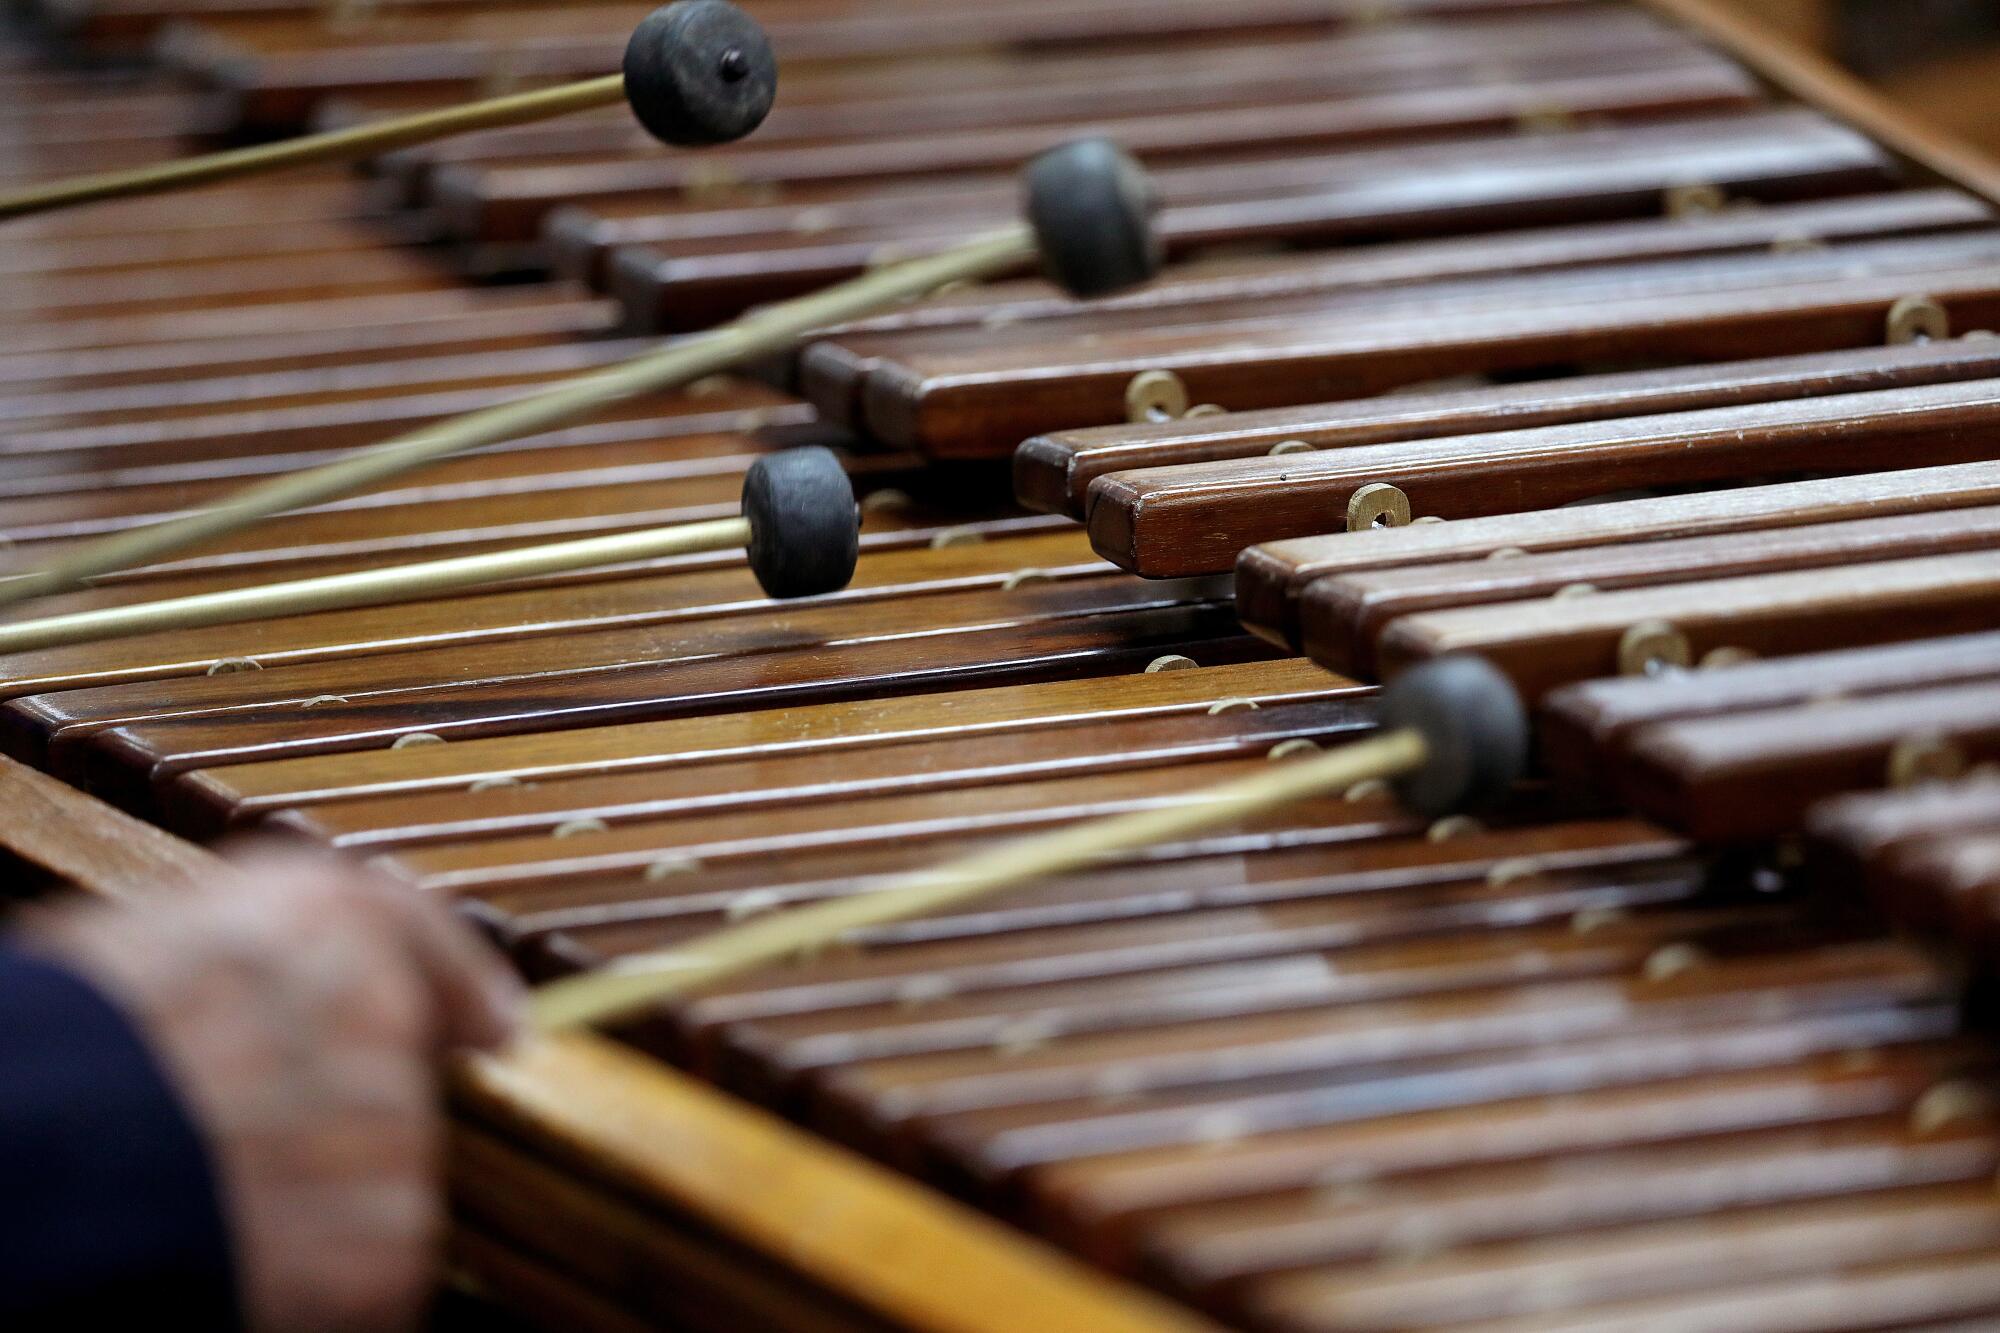 A close-up view of hands playing the marimba